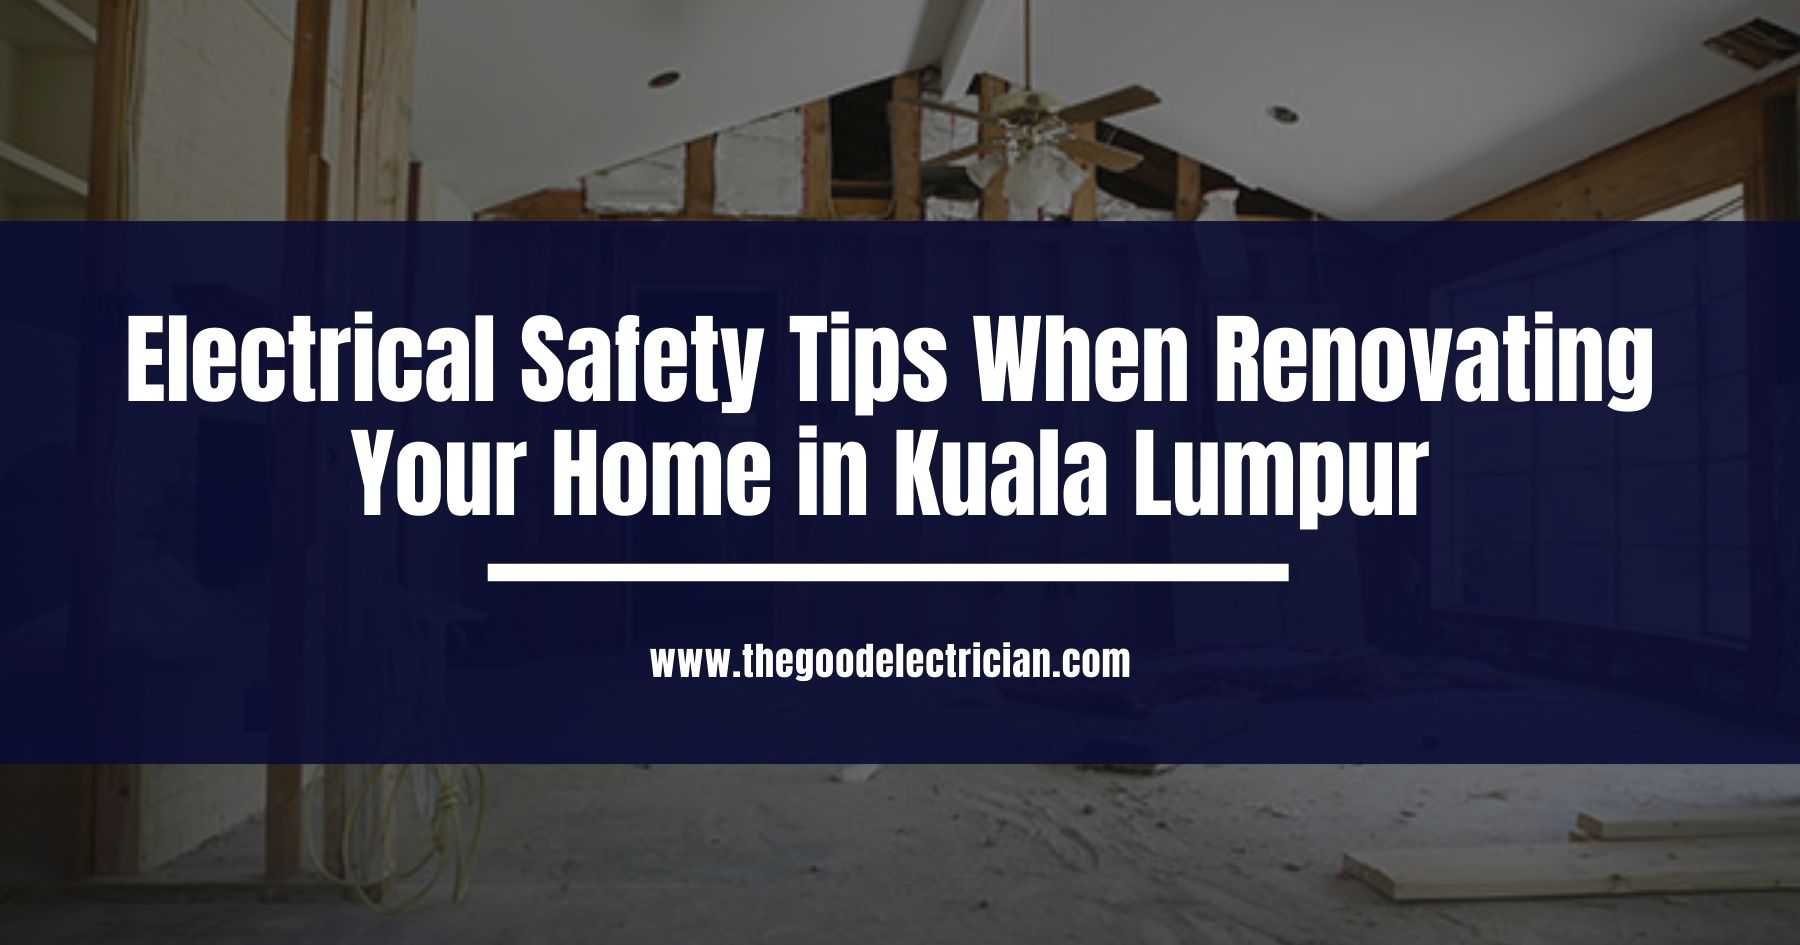 You are currently viewing Electrical Safety Tips When Renovating Your Home in Kuala Lumpur